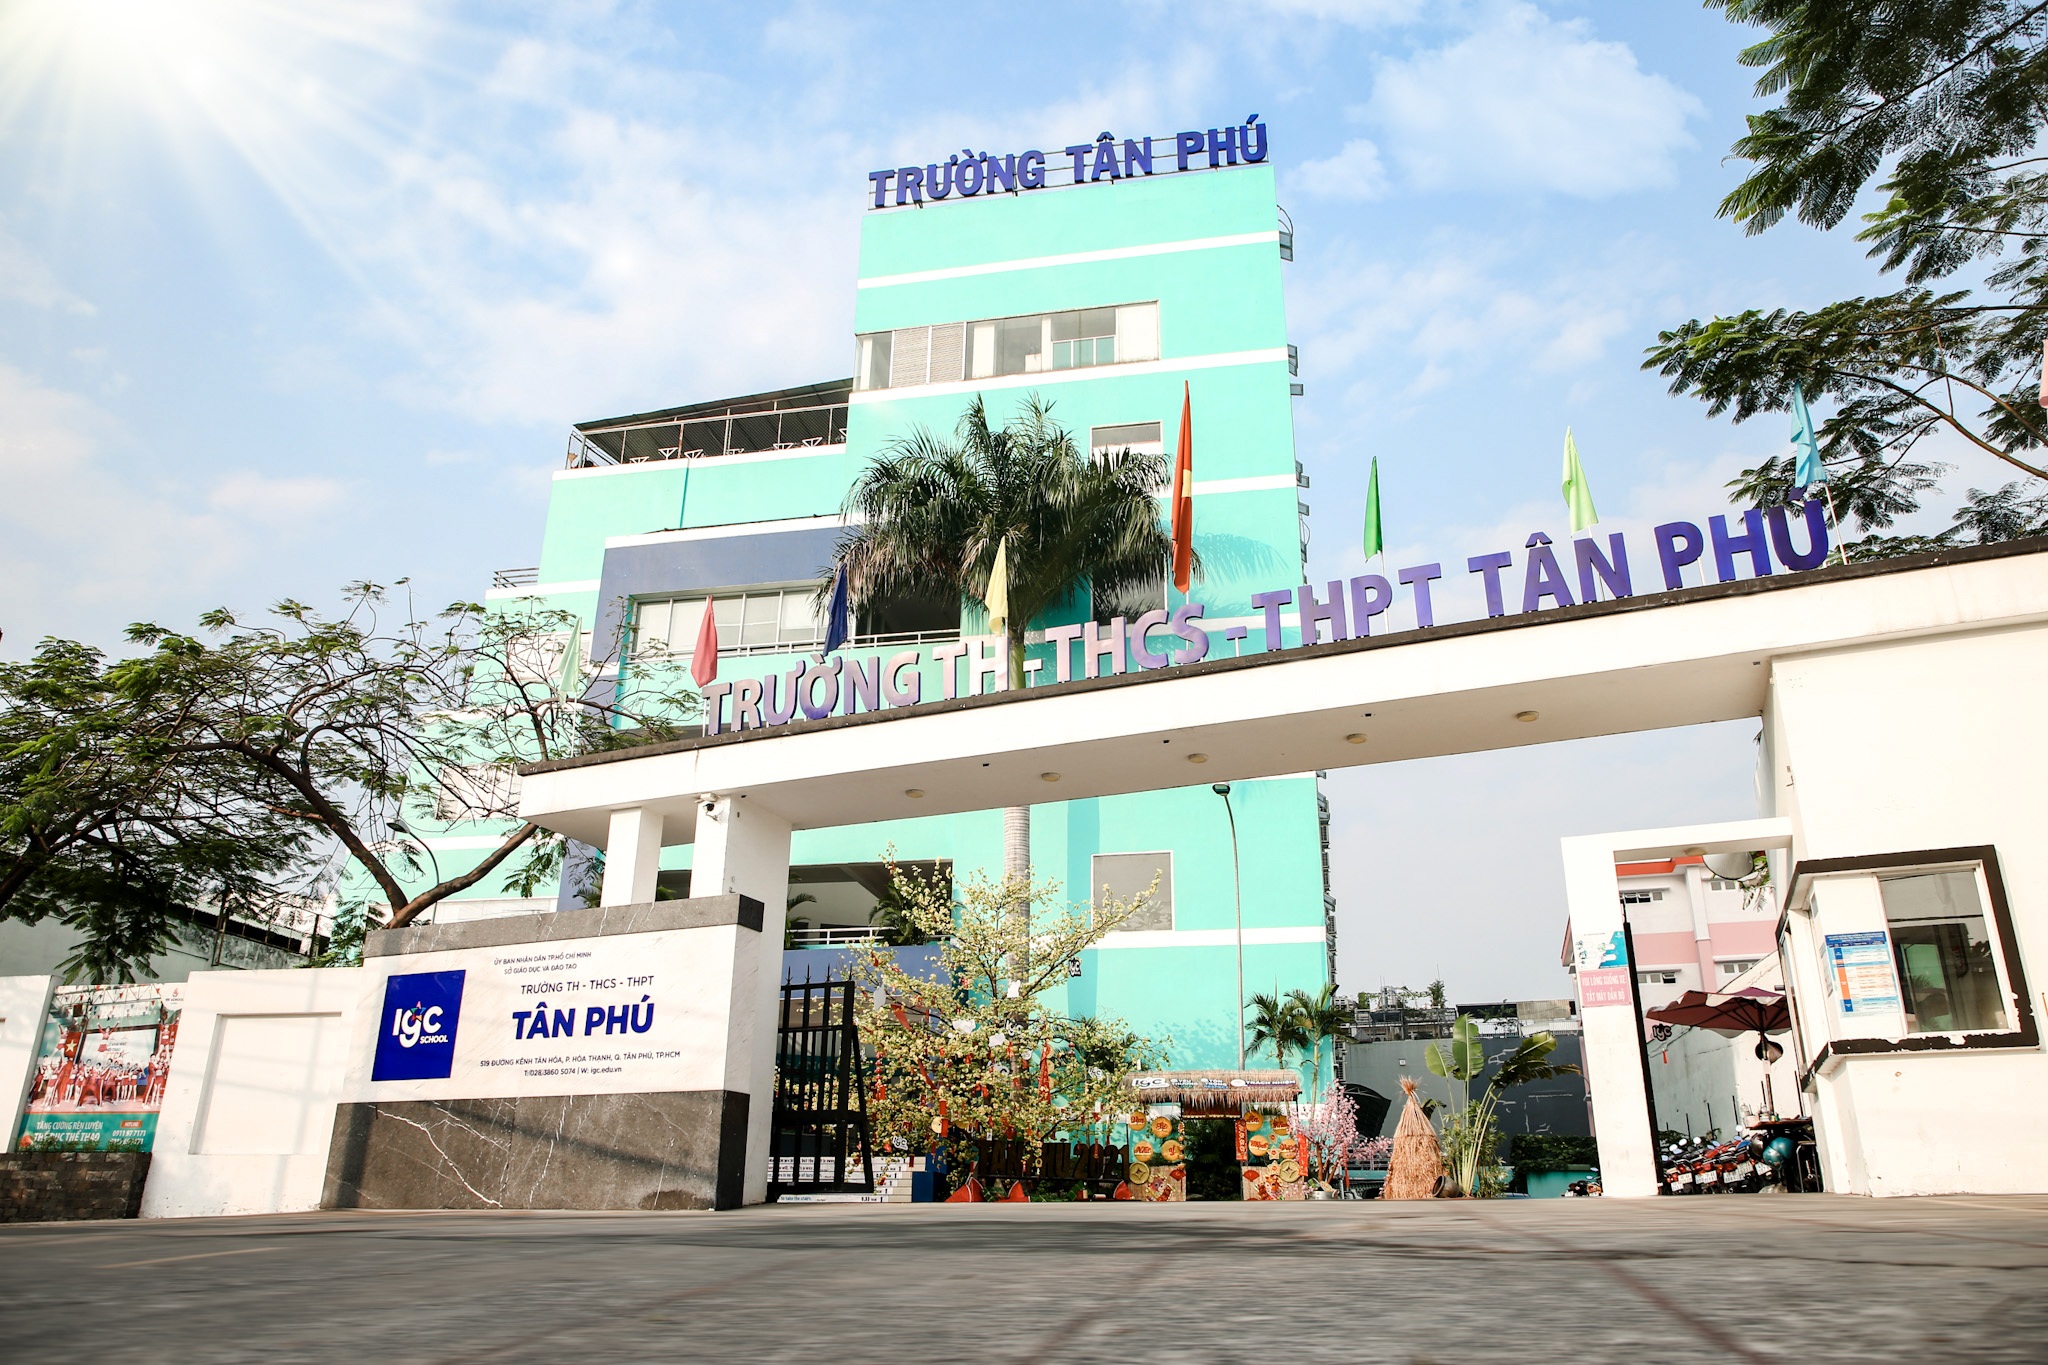 TAN PHU PRIMARY – MIDDLE - HIGH SCHOOL